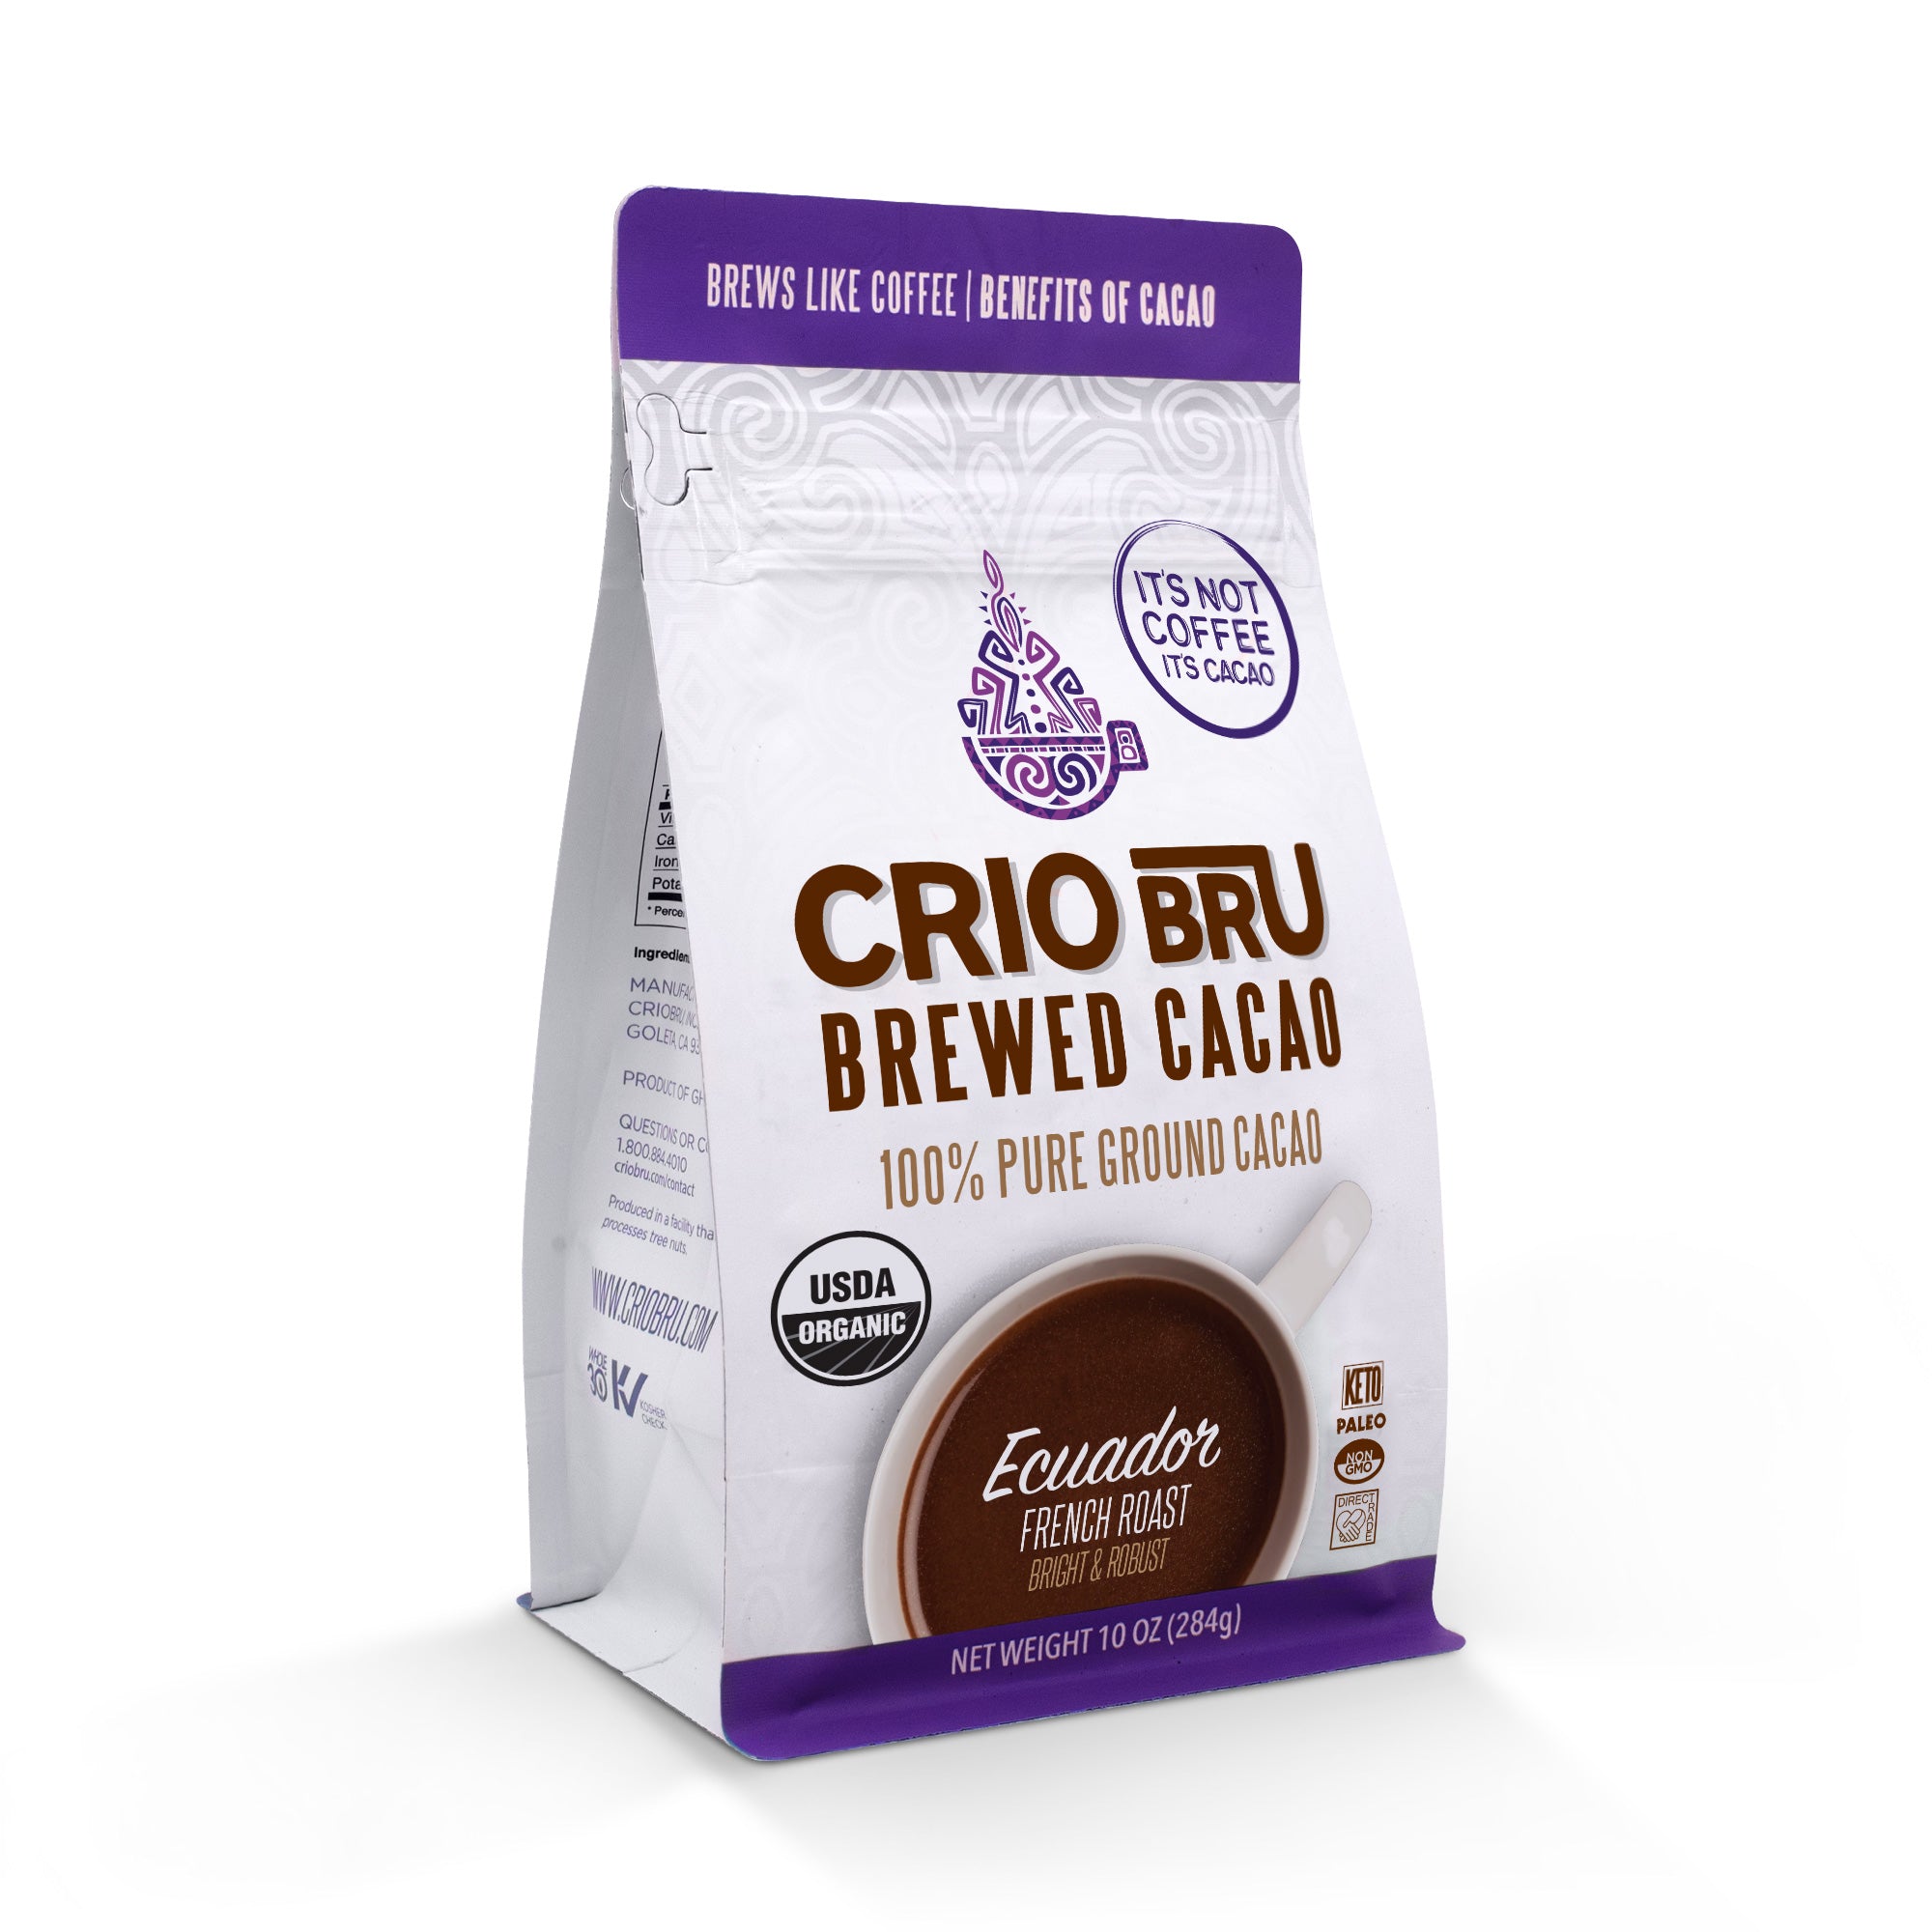 Crio Bru: Brewed Cacao | It's not coffee, it's cacao!